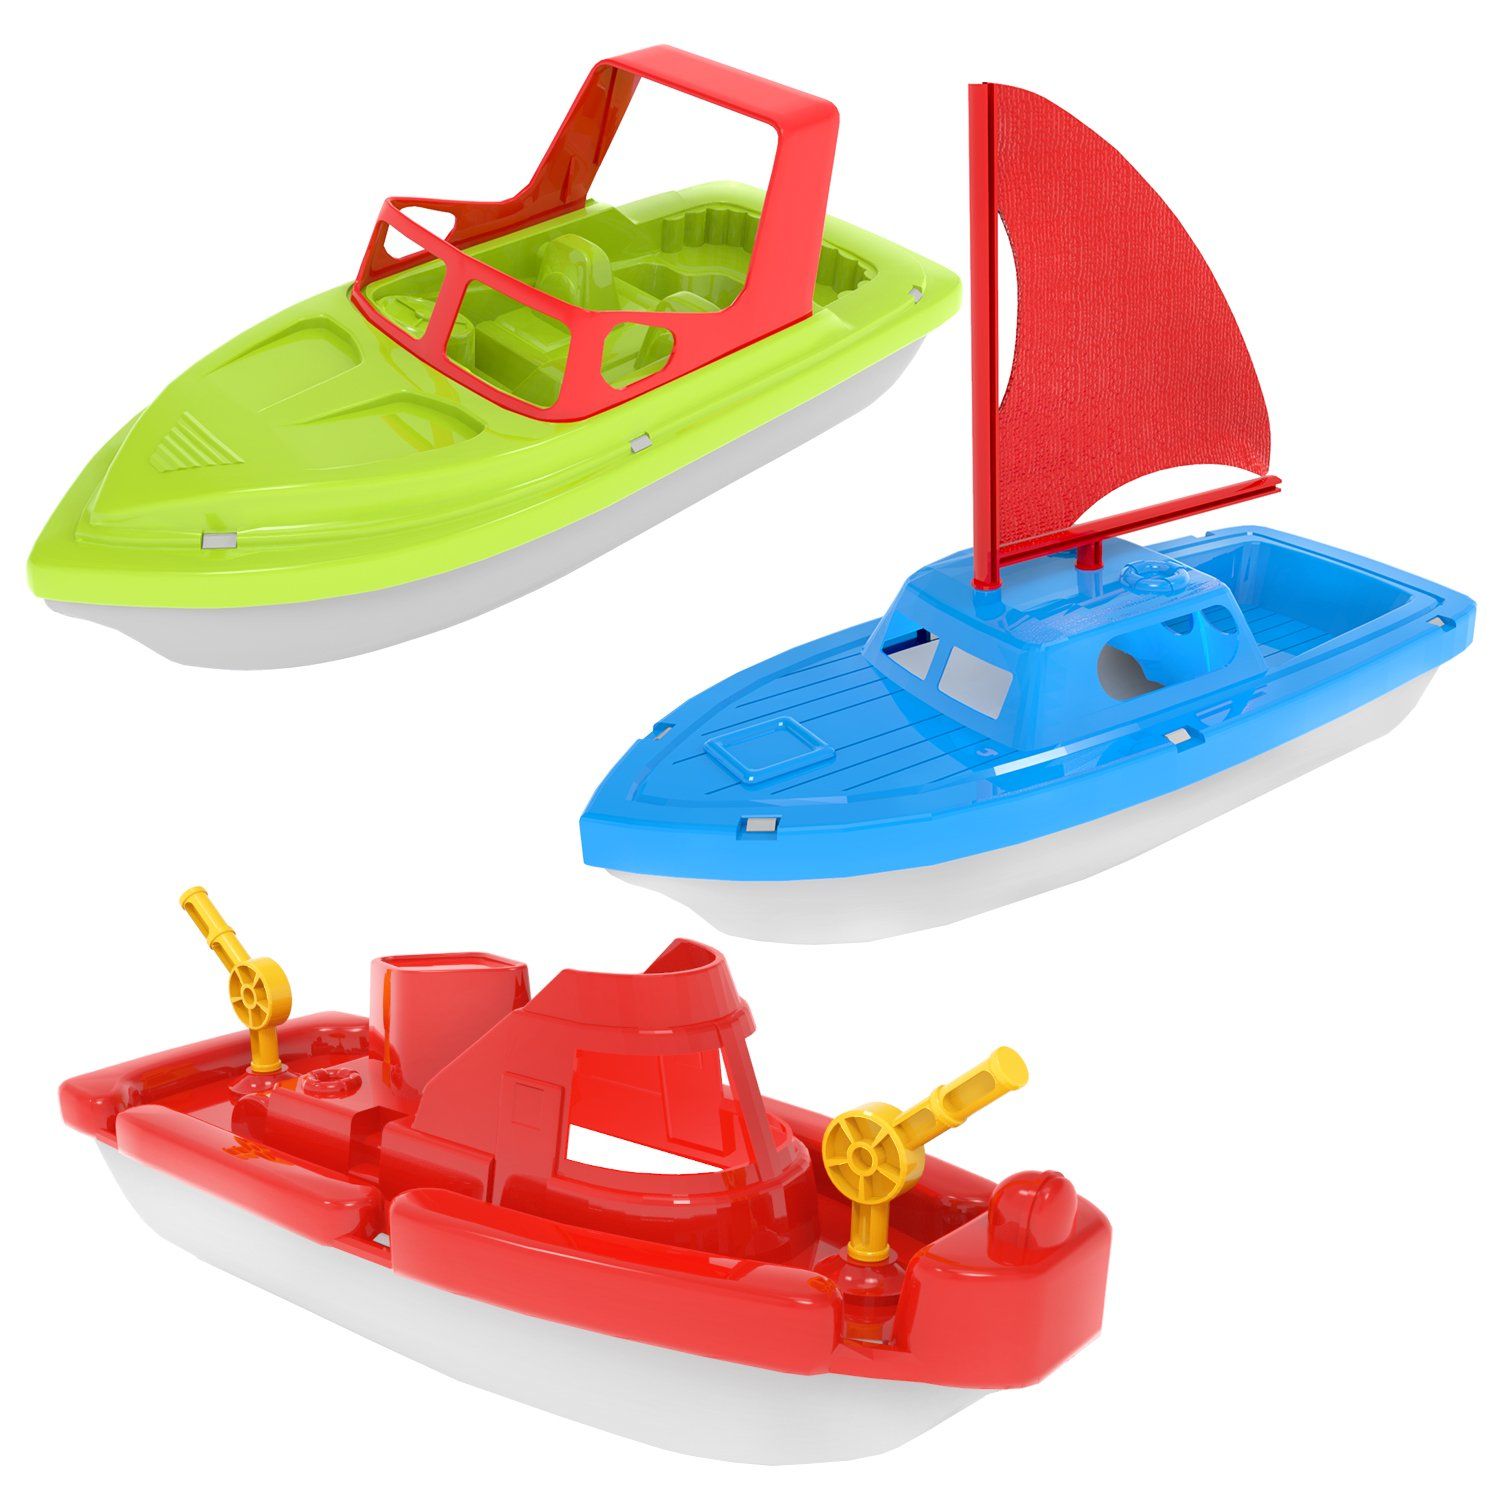 Fun Little Toys 3 Pcs Bath Boat Toy, Pool Toy,Speed Boat, Sailing Boat, Aircraft Carrier, Bath To... | Walmart (US)